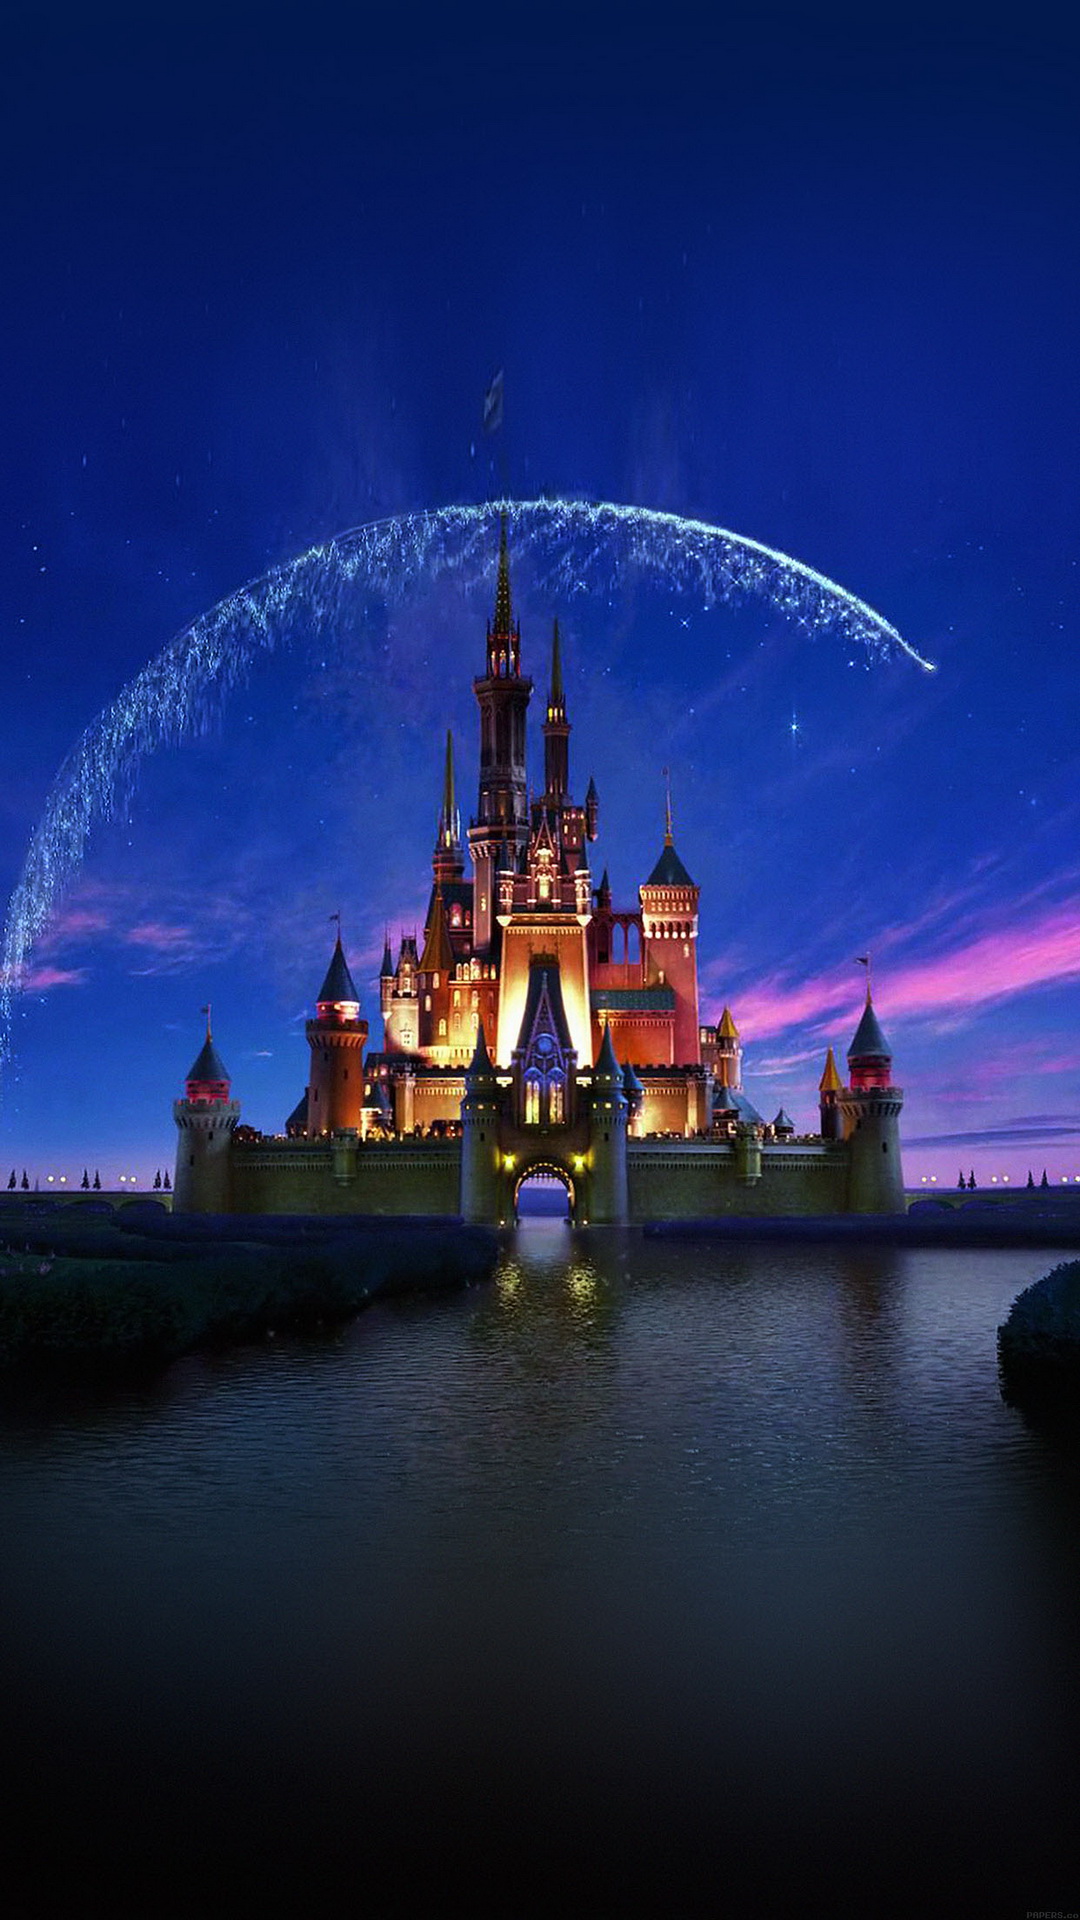 Disney Castle   Top 10 HTC One M9 wallpapers download